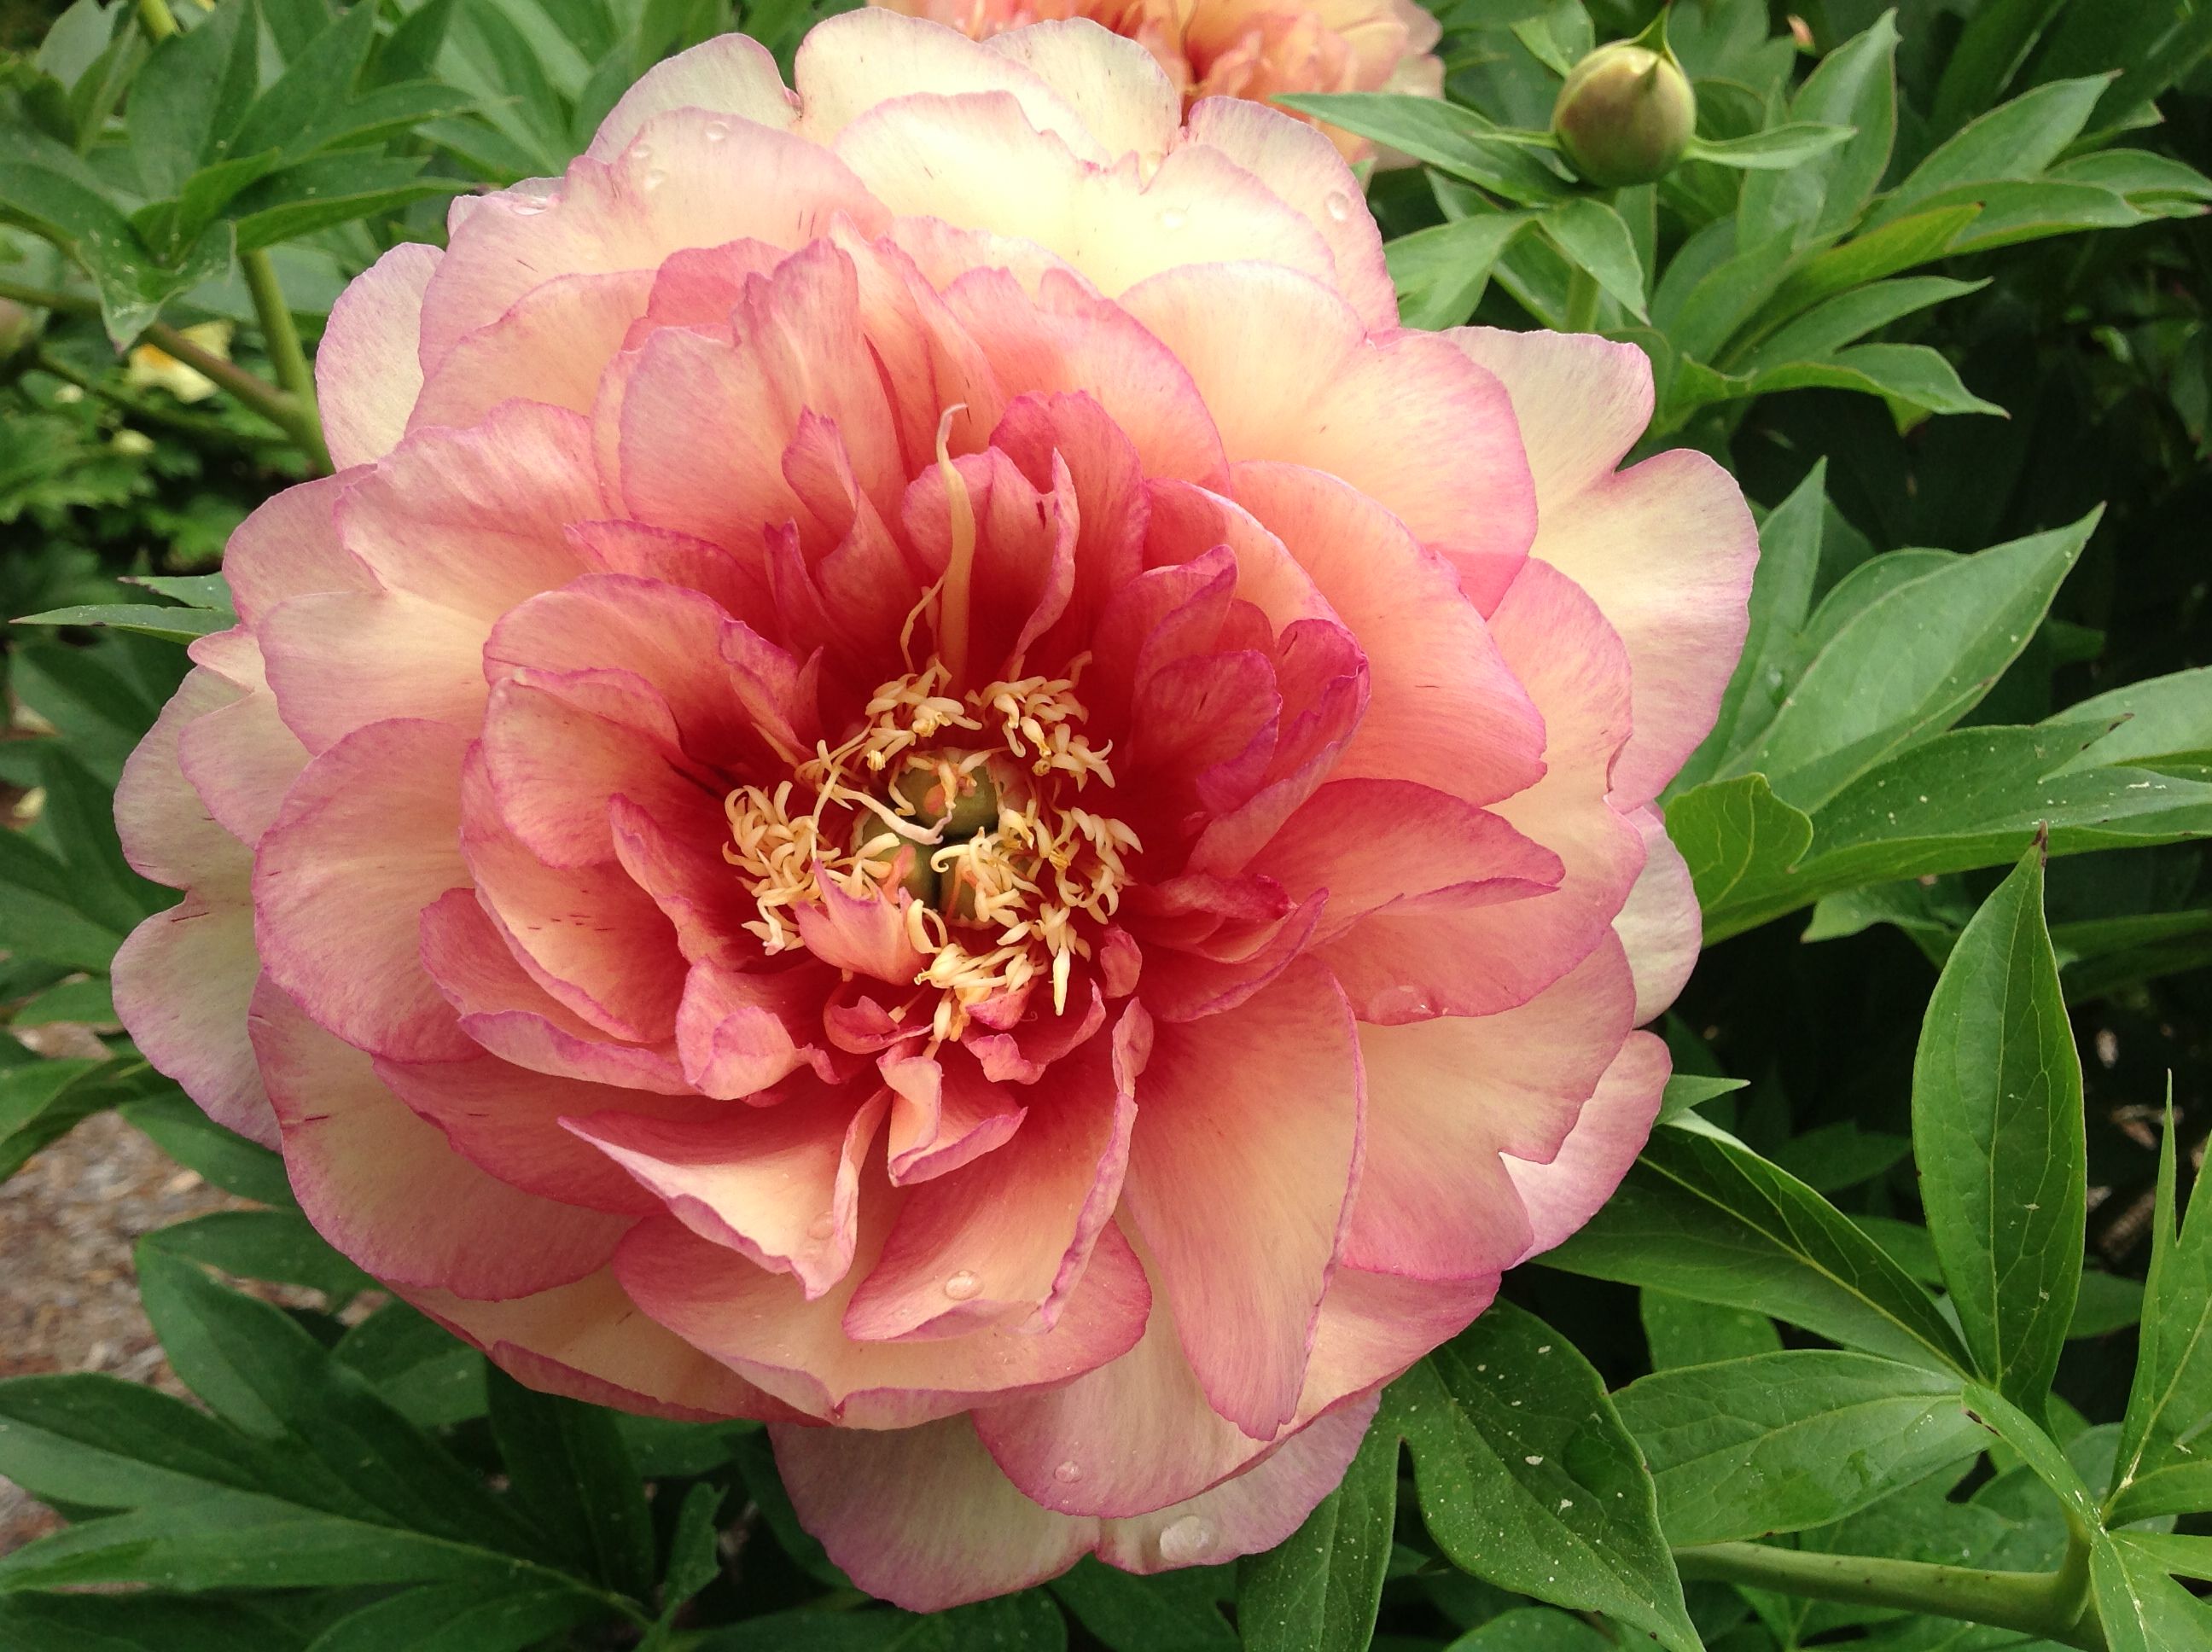 images/plants/paeonia/pae-truly-scrumptious/pae-truly-scrumptious-0010.JPG